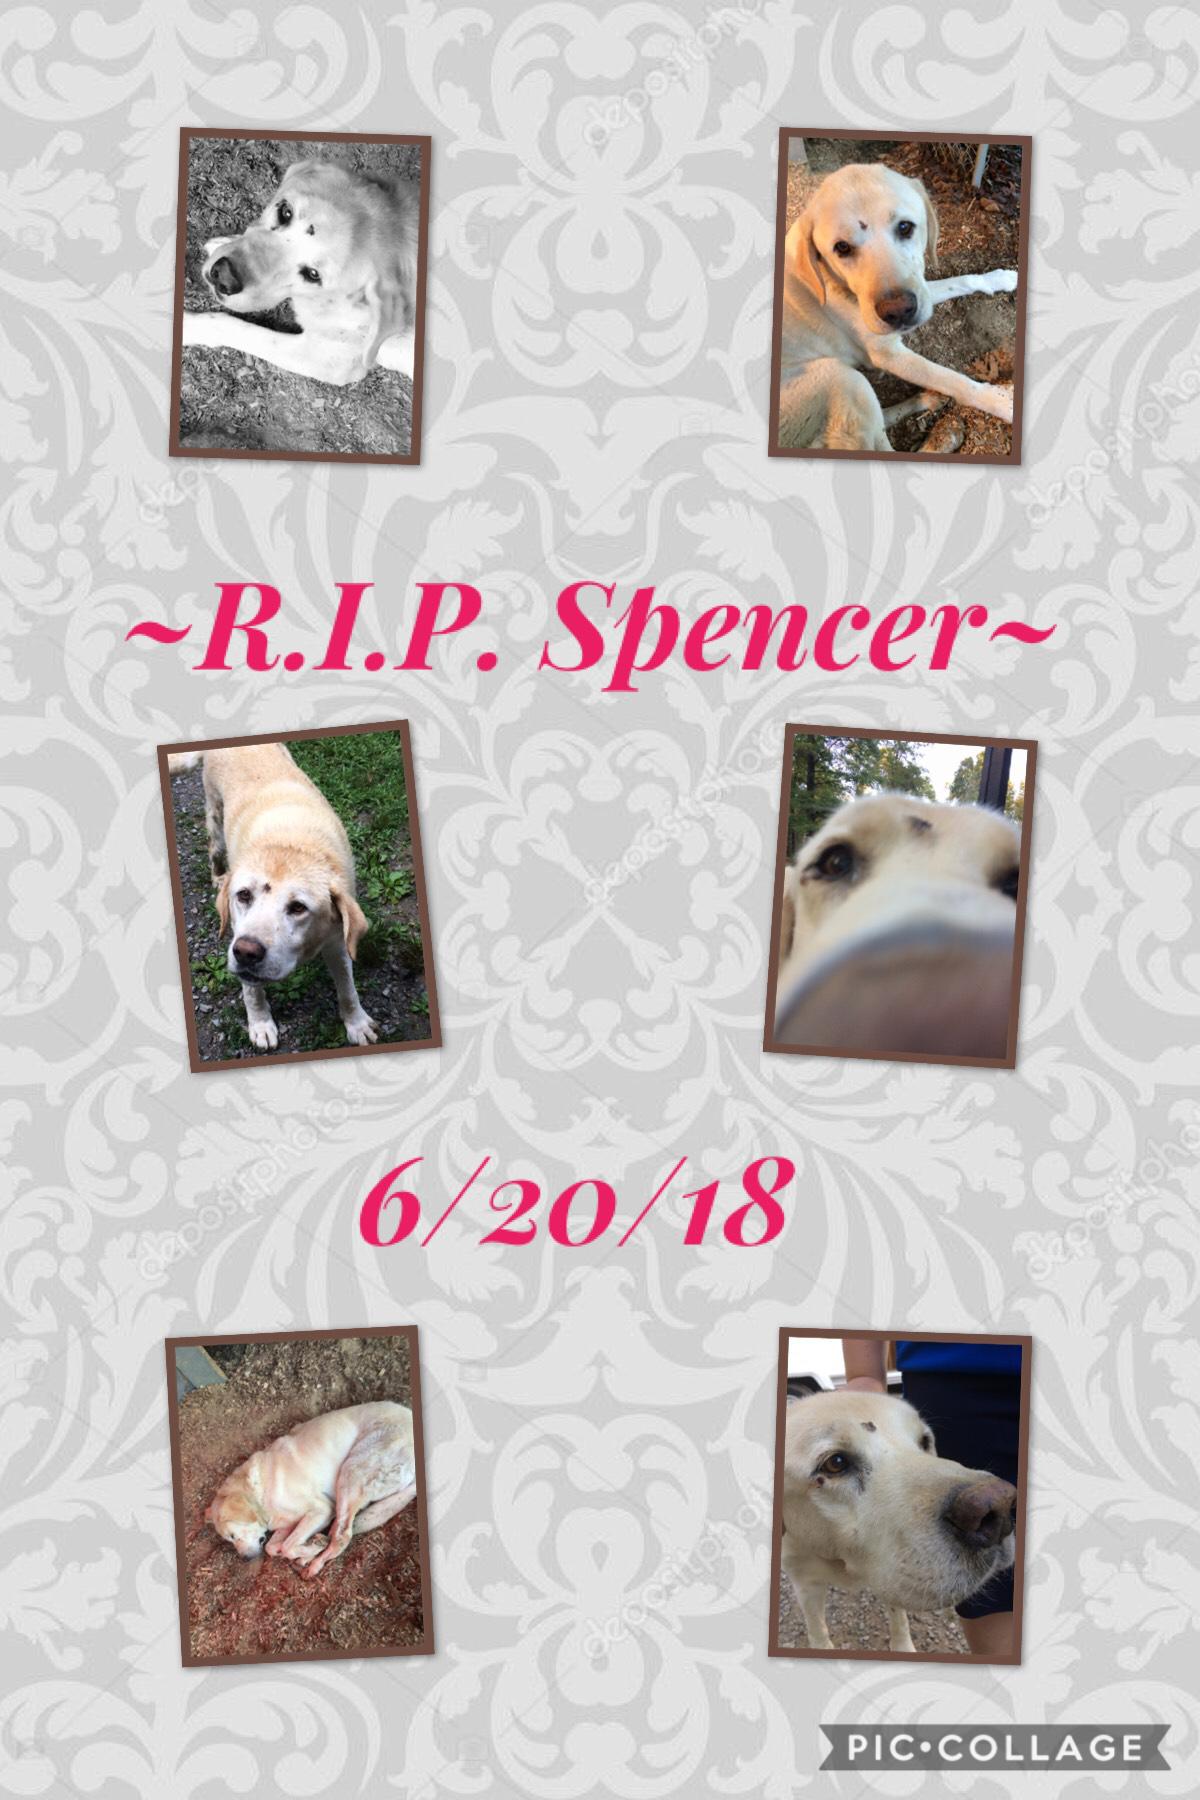 Tap!
RIP Spencer, a very sweet dog.